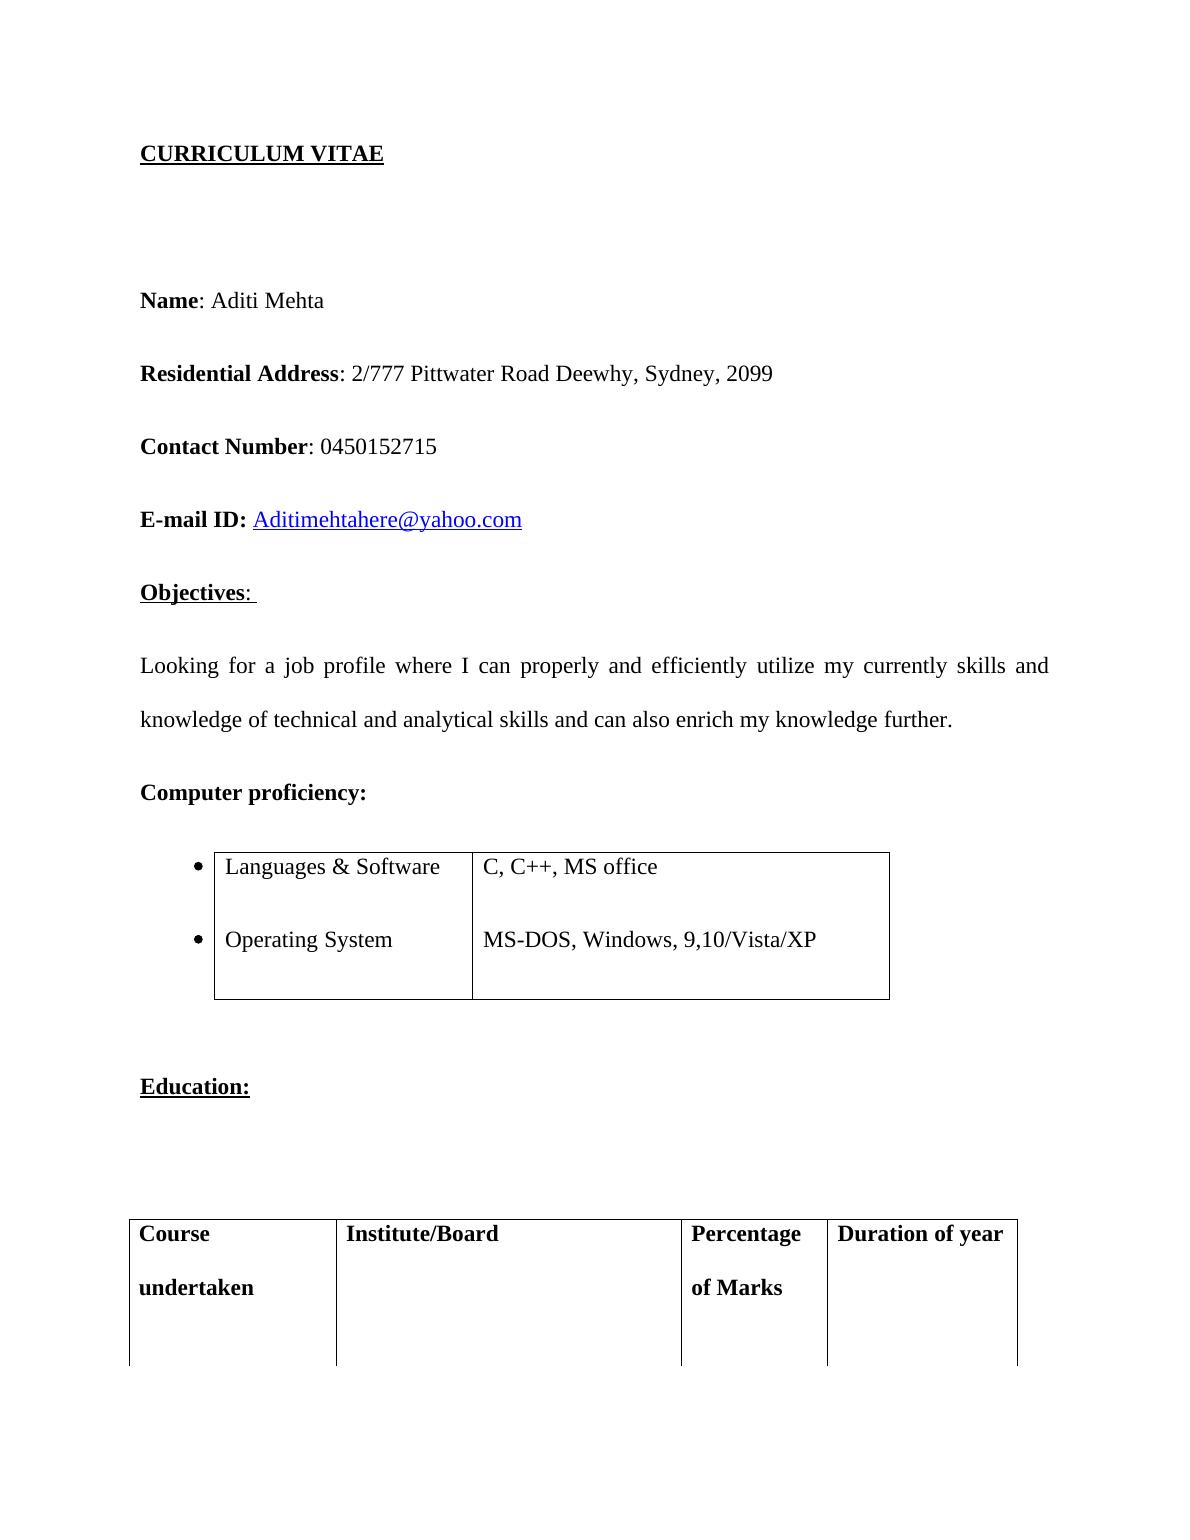 Assignment on Cover Letter_2